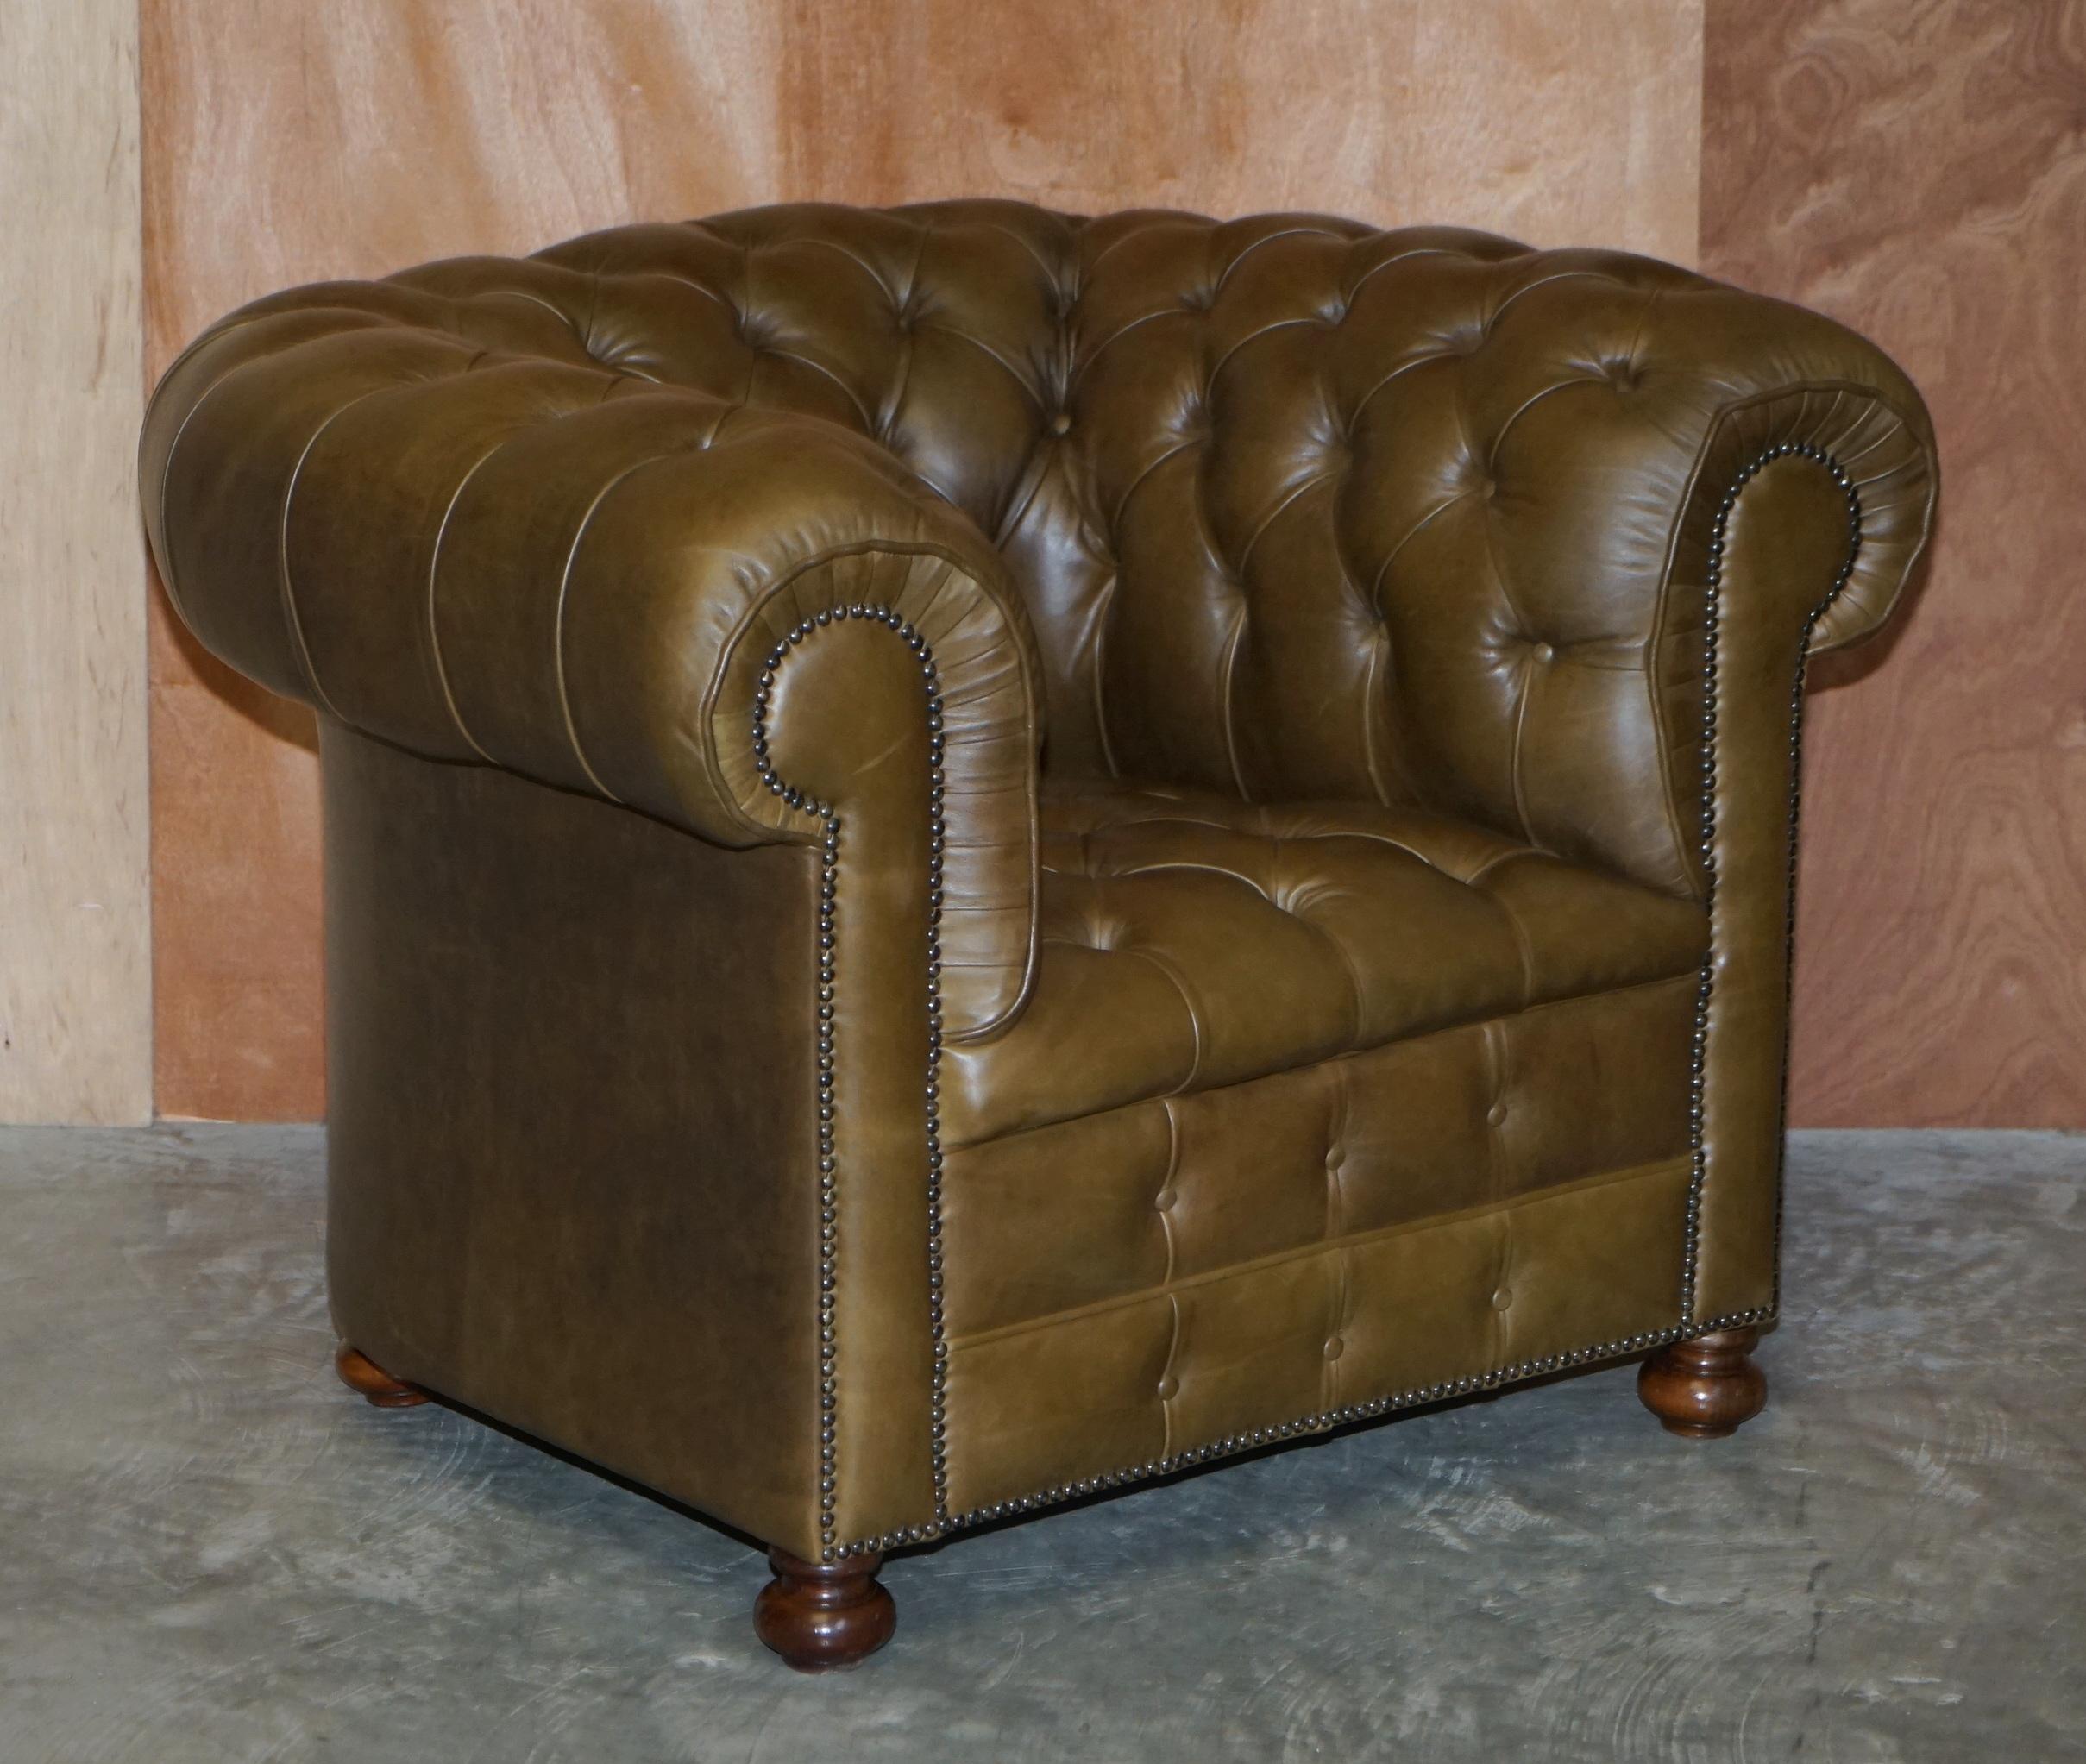 Stunning Vintage Fully Tufted Chesterfield Olive Green Leather Sofa & Armchair For Sale 3